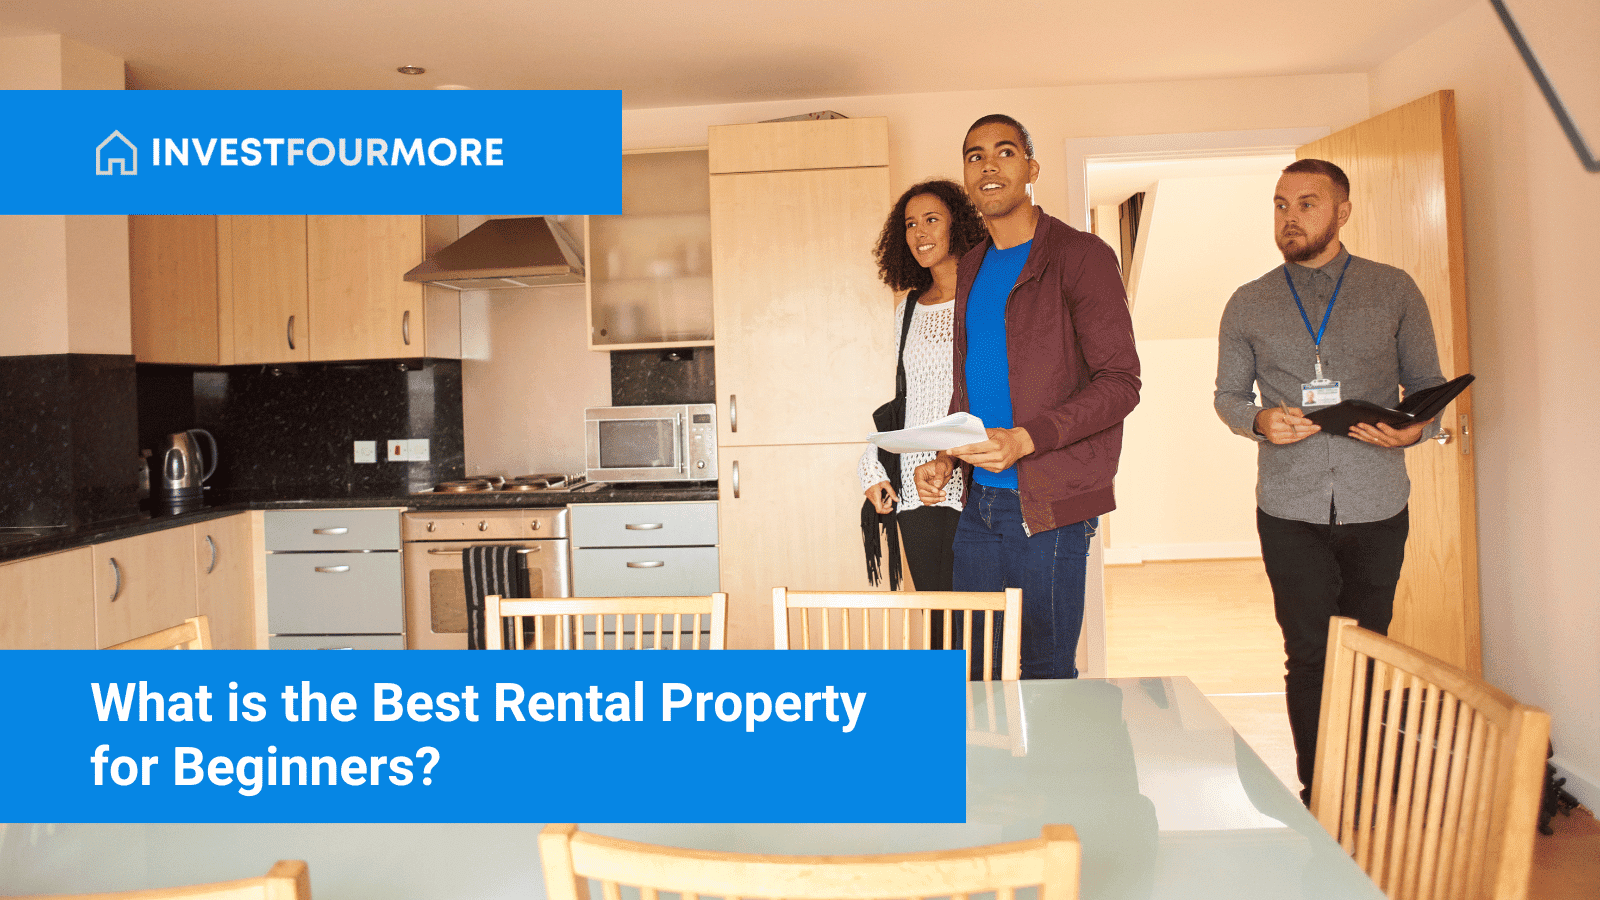 What is the Best Type of Rental Property for Beginners?